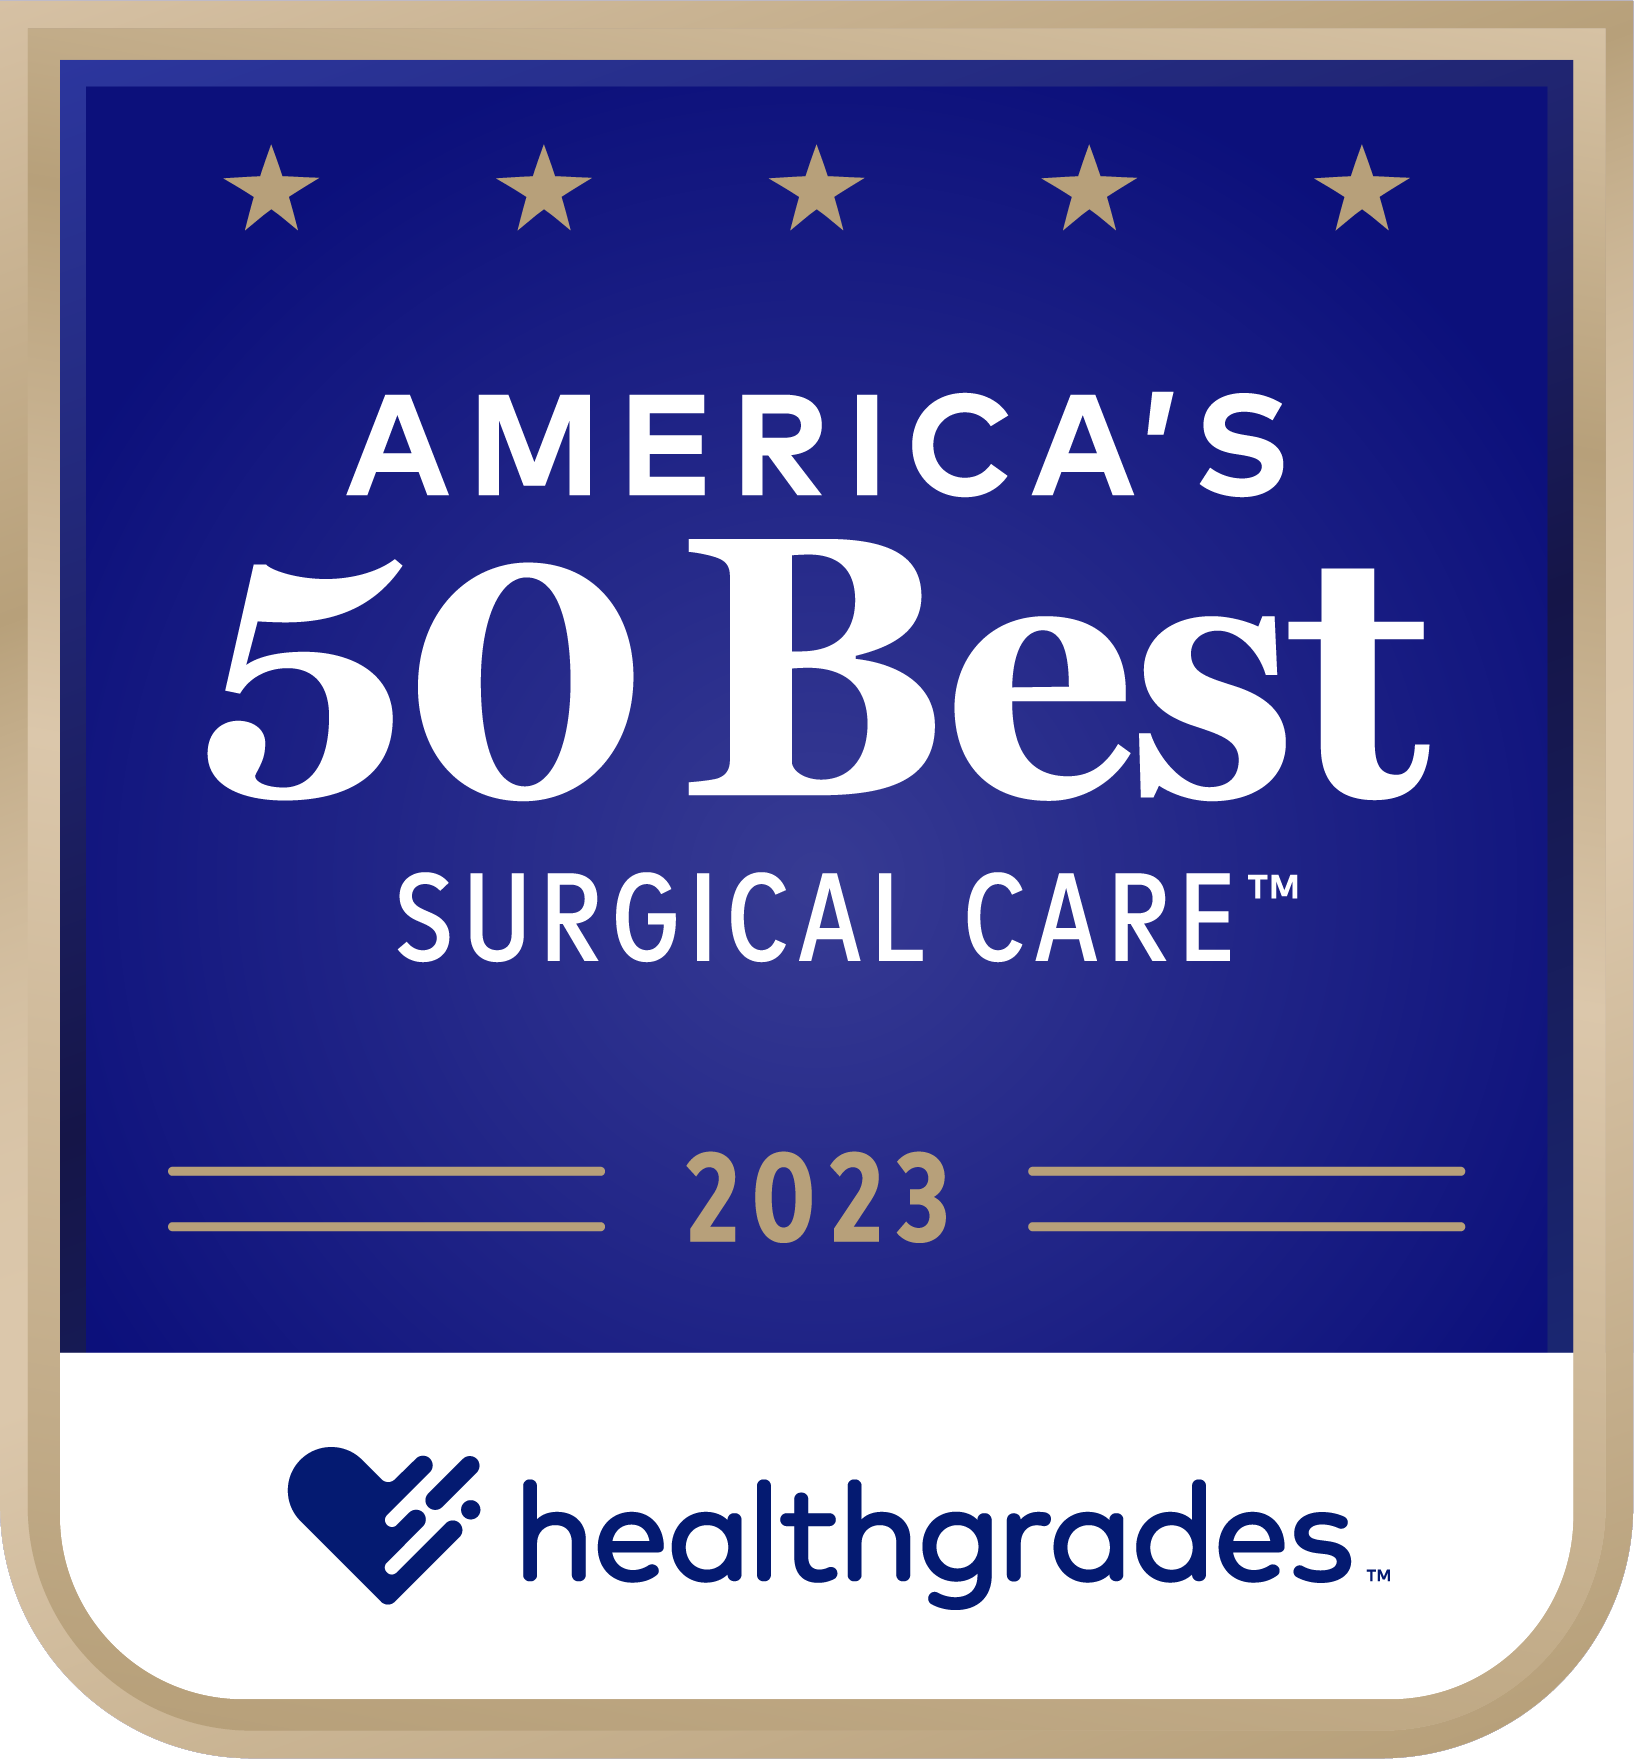 HG_Americas_50_Best_Surgical_Care_Award_Image_2023